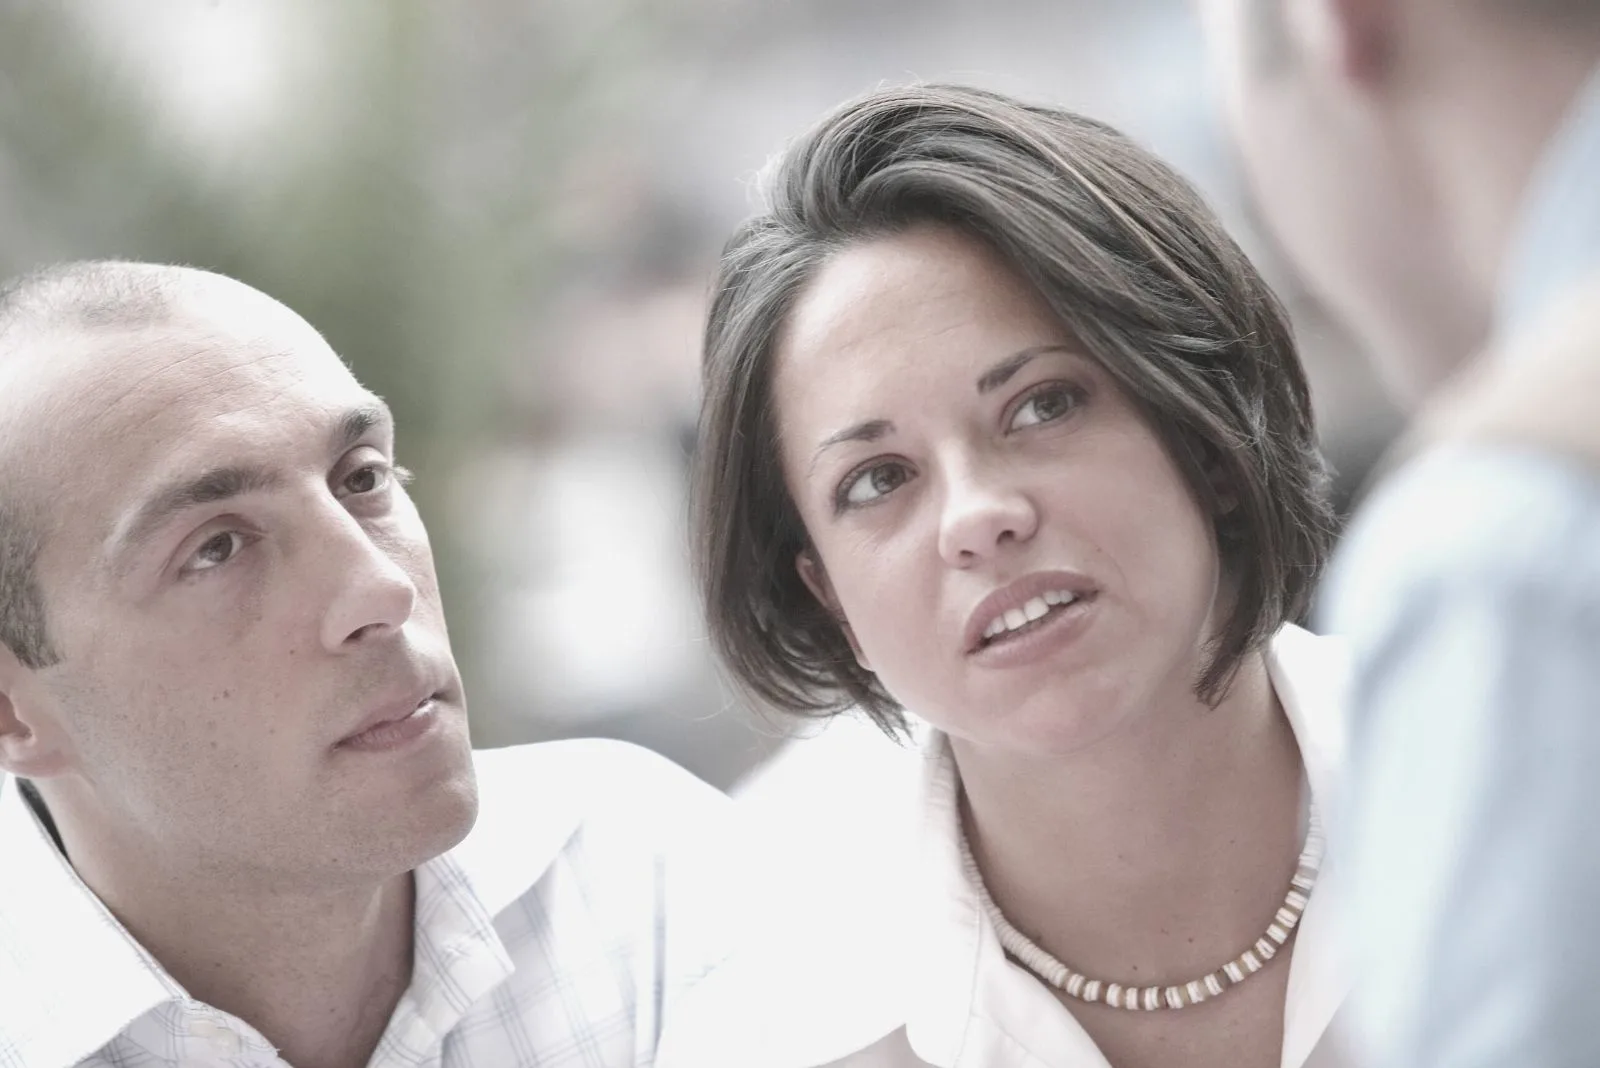 couple in serious conversation with another person in focus